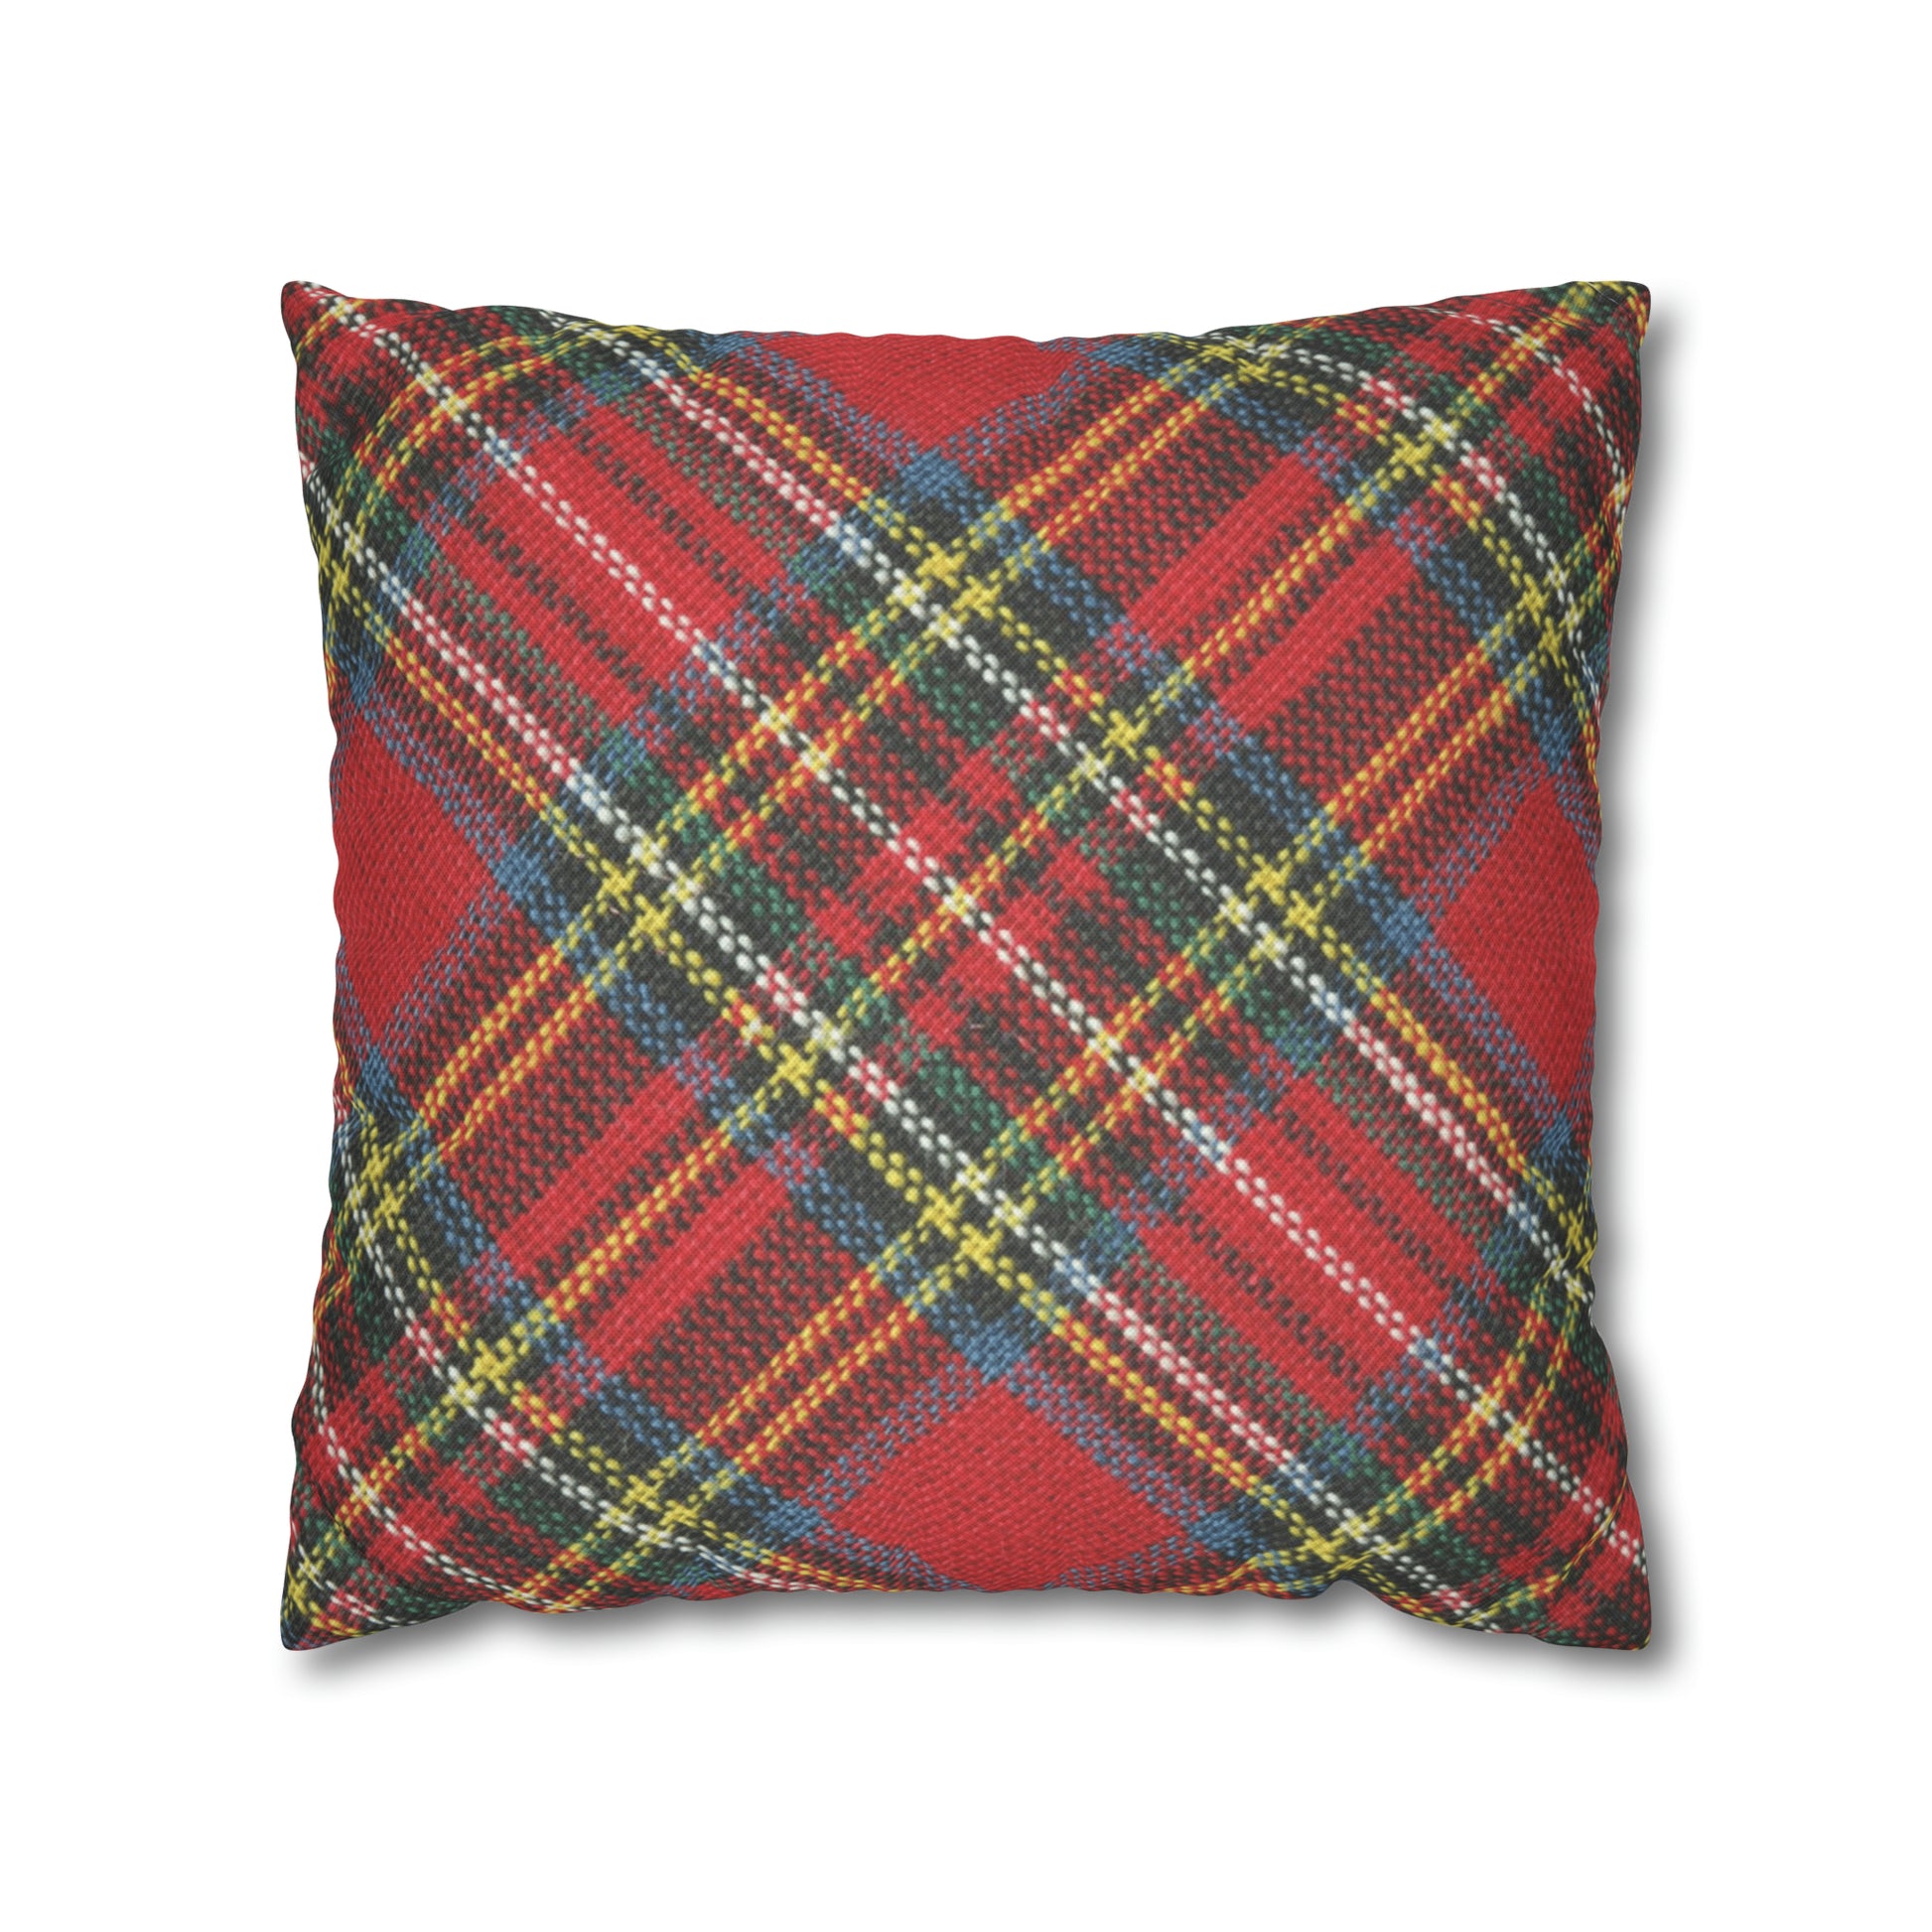 This Printify red-plaid pillow case, American made with an easy-care fabric, features a white background.